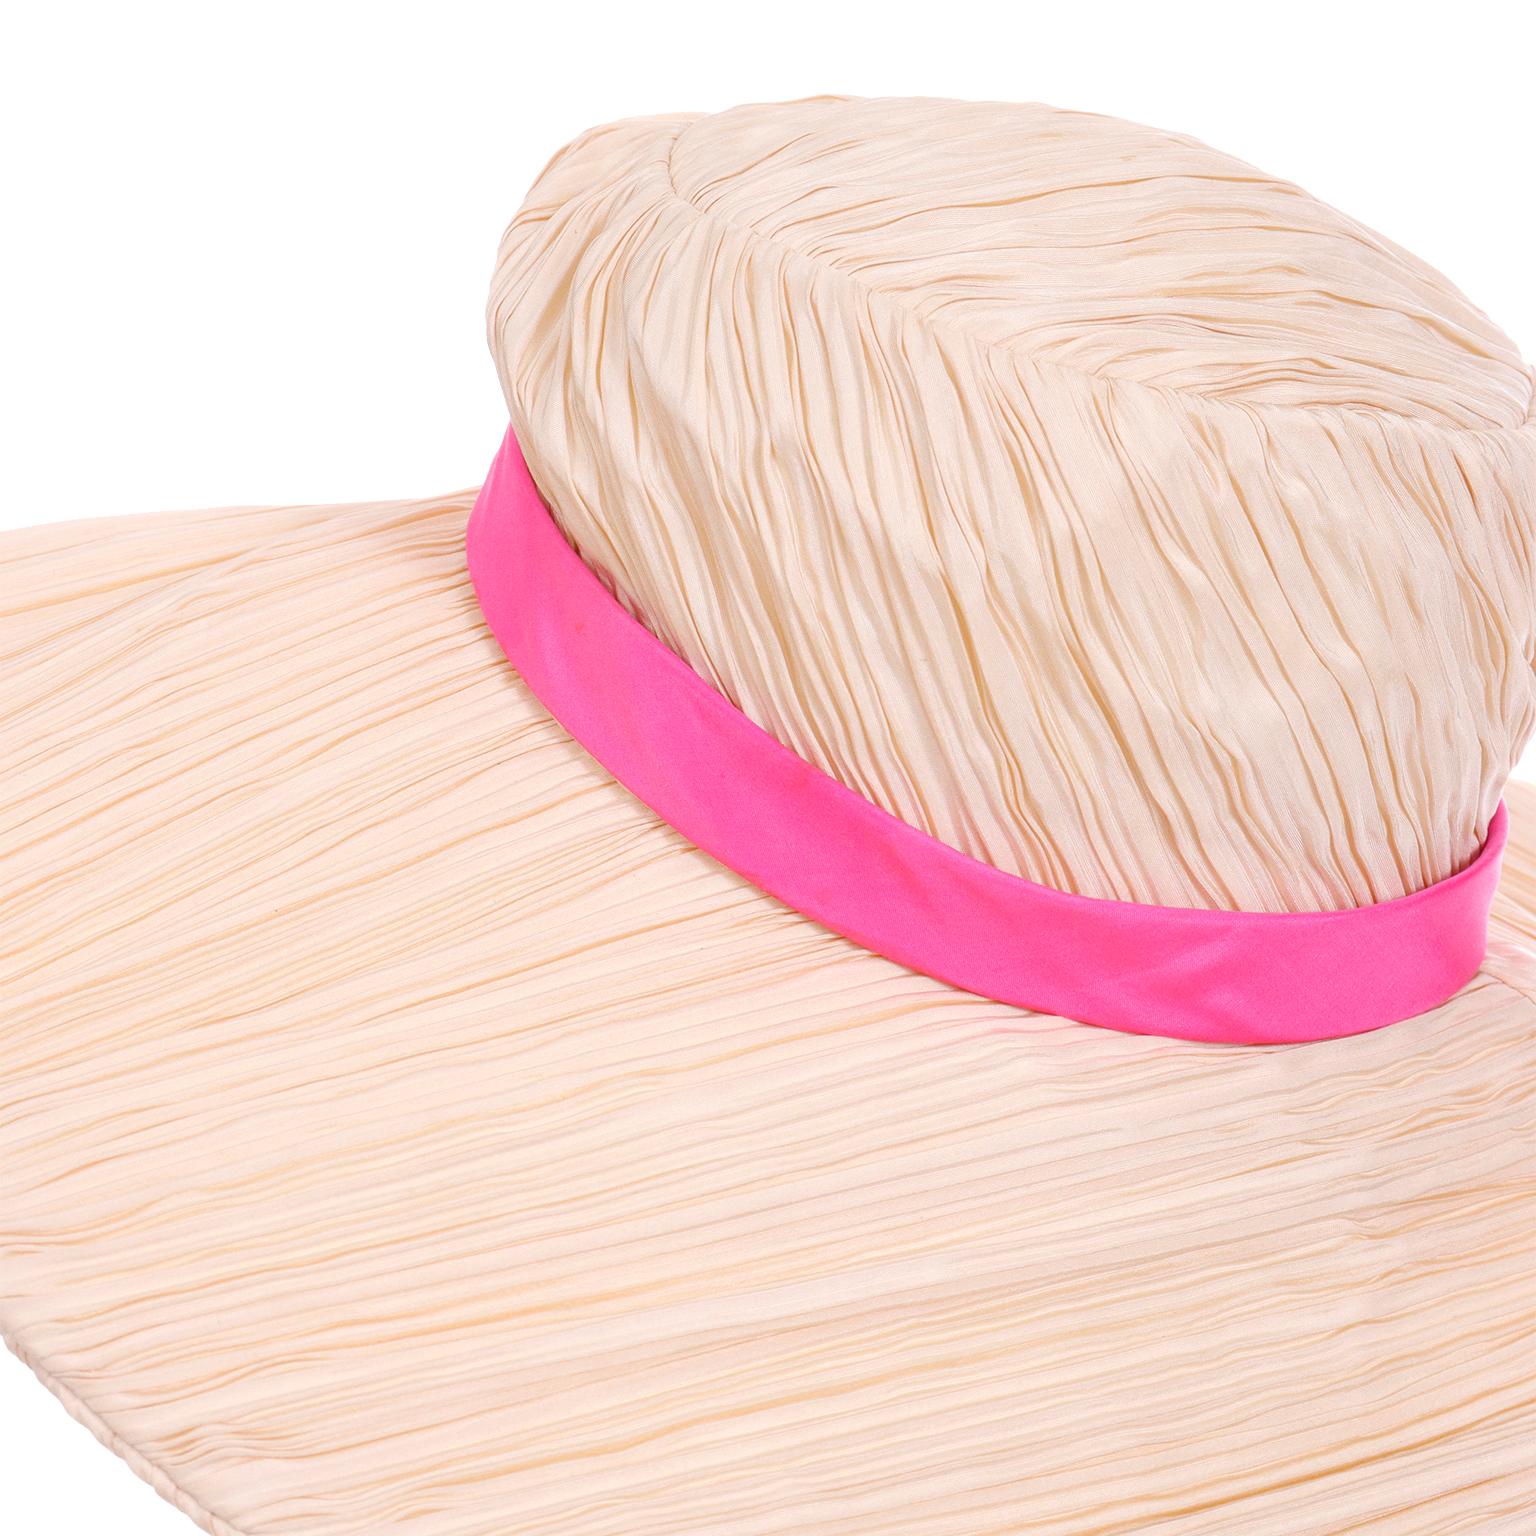 Women's Mr John Vintage Pleated Cream Floppy Hat With Hot Pink Silk Band Ribbon For Sale